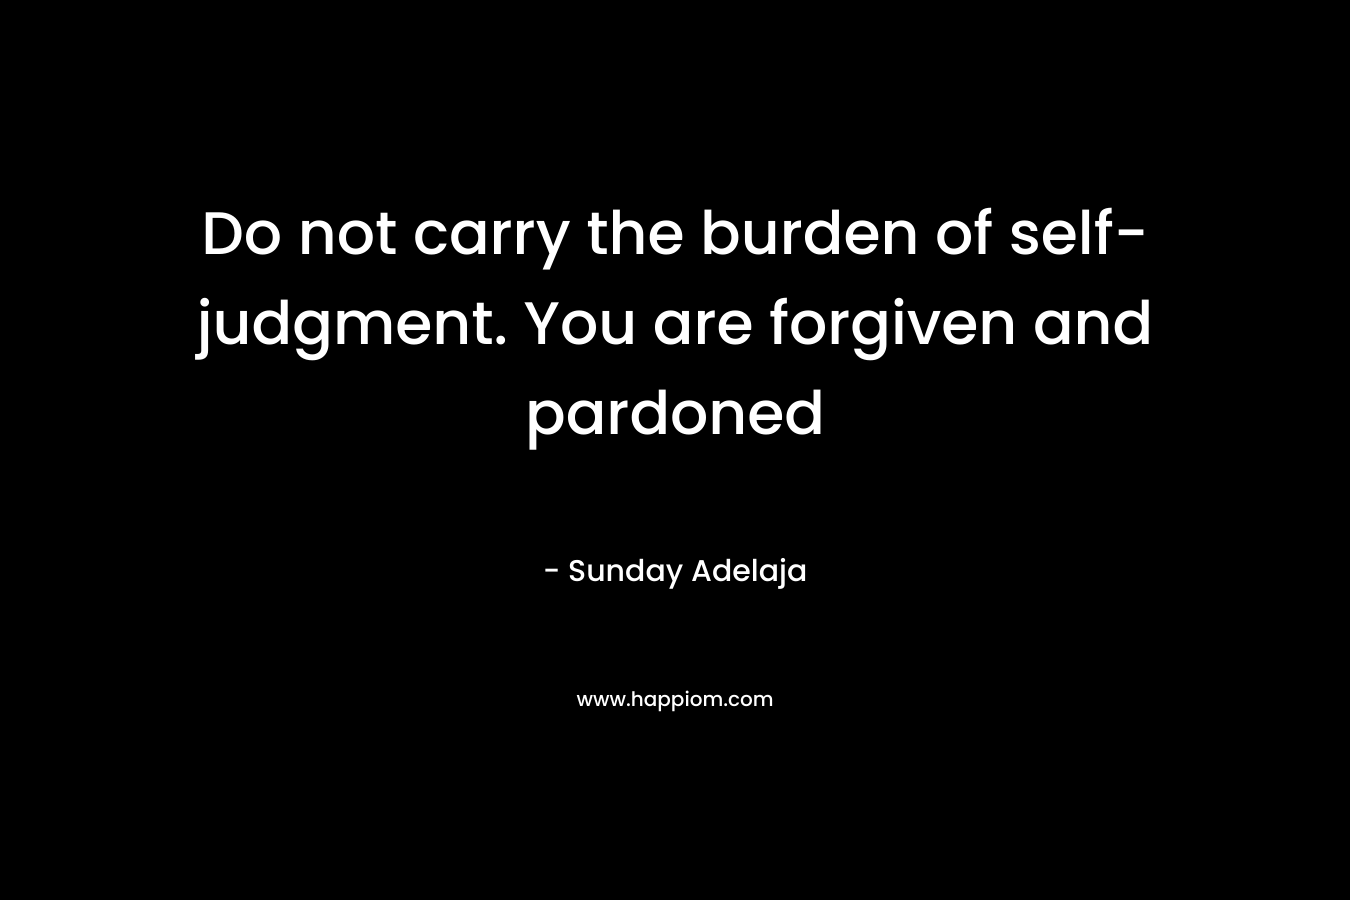 Do not carry the burden of self-judgment. You are forgiven and pardoned